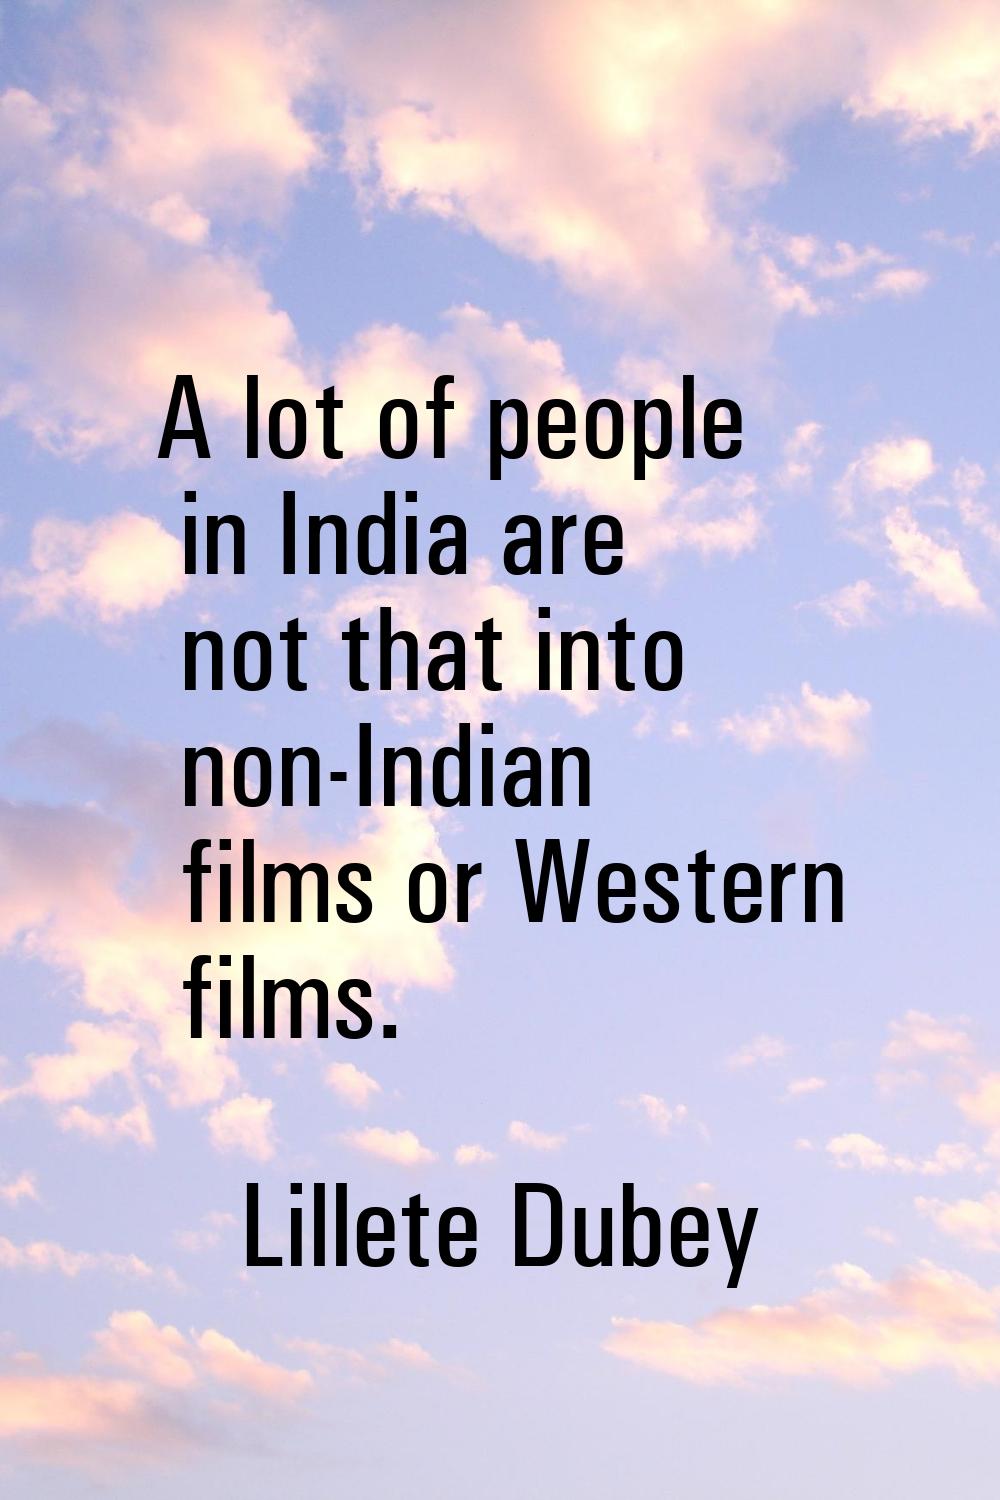 A lot of people in India are not that into non-Indian films or Western films.